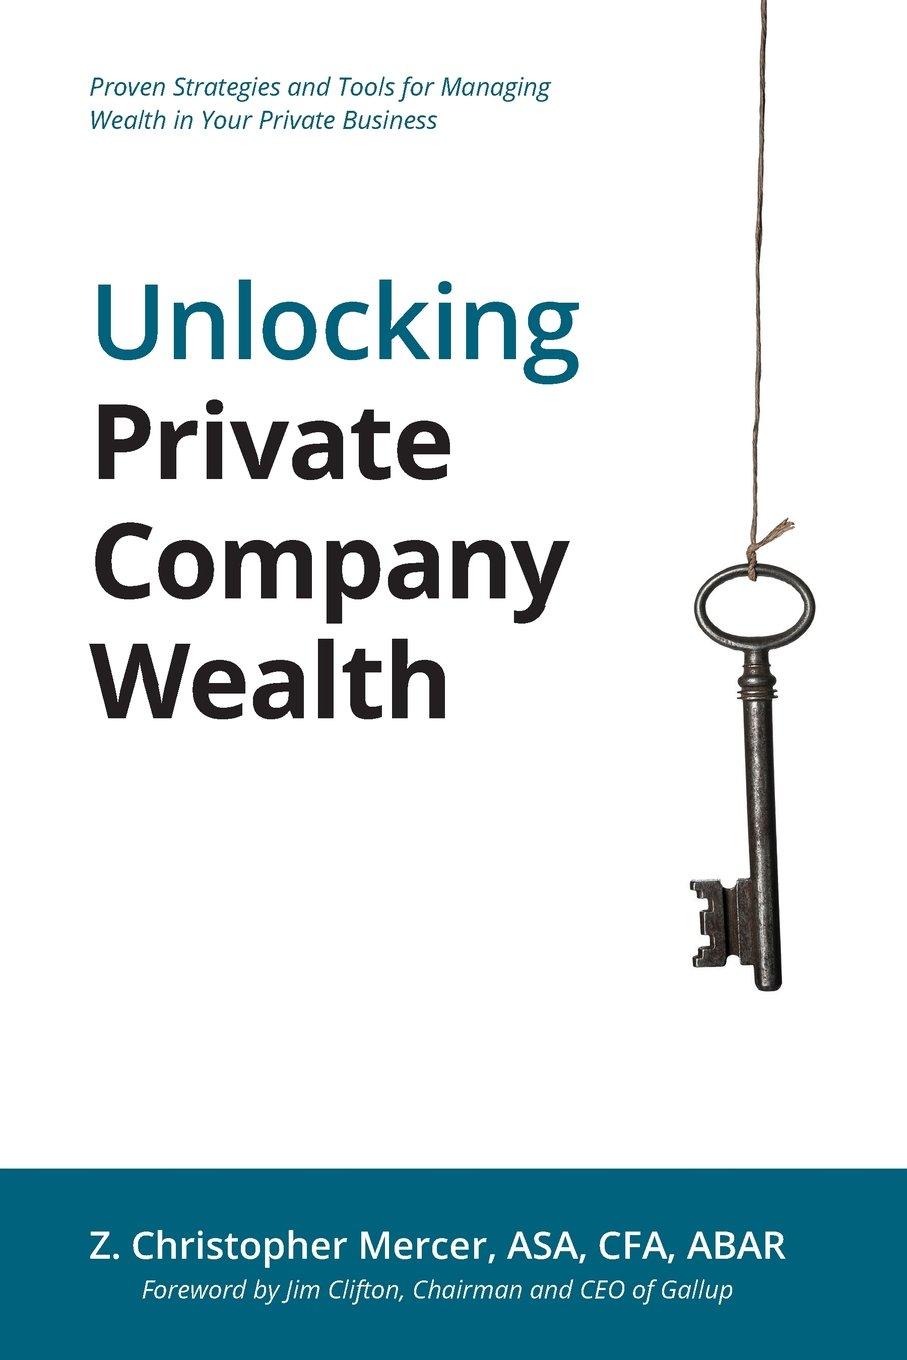 unlocking private company wealth 1st edition z. christopher mercer, jim clifton 097006988x, 978-0970069887